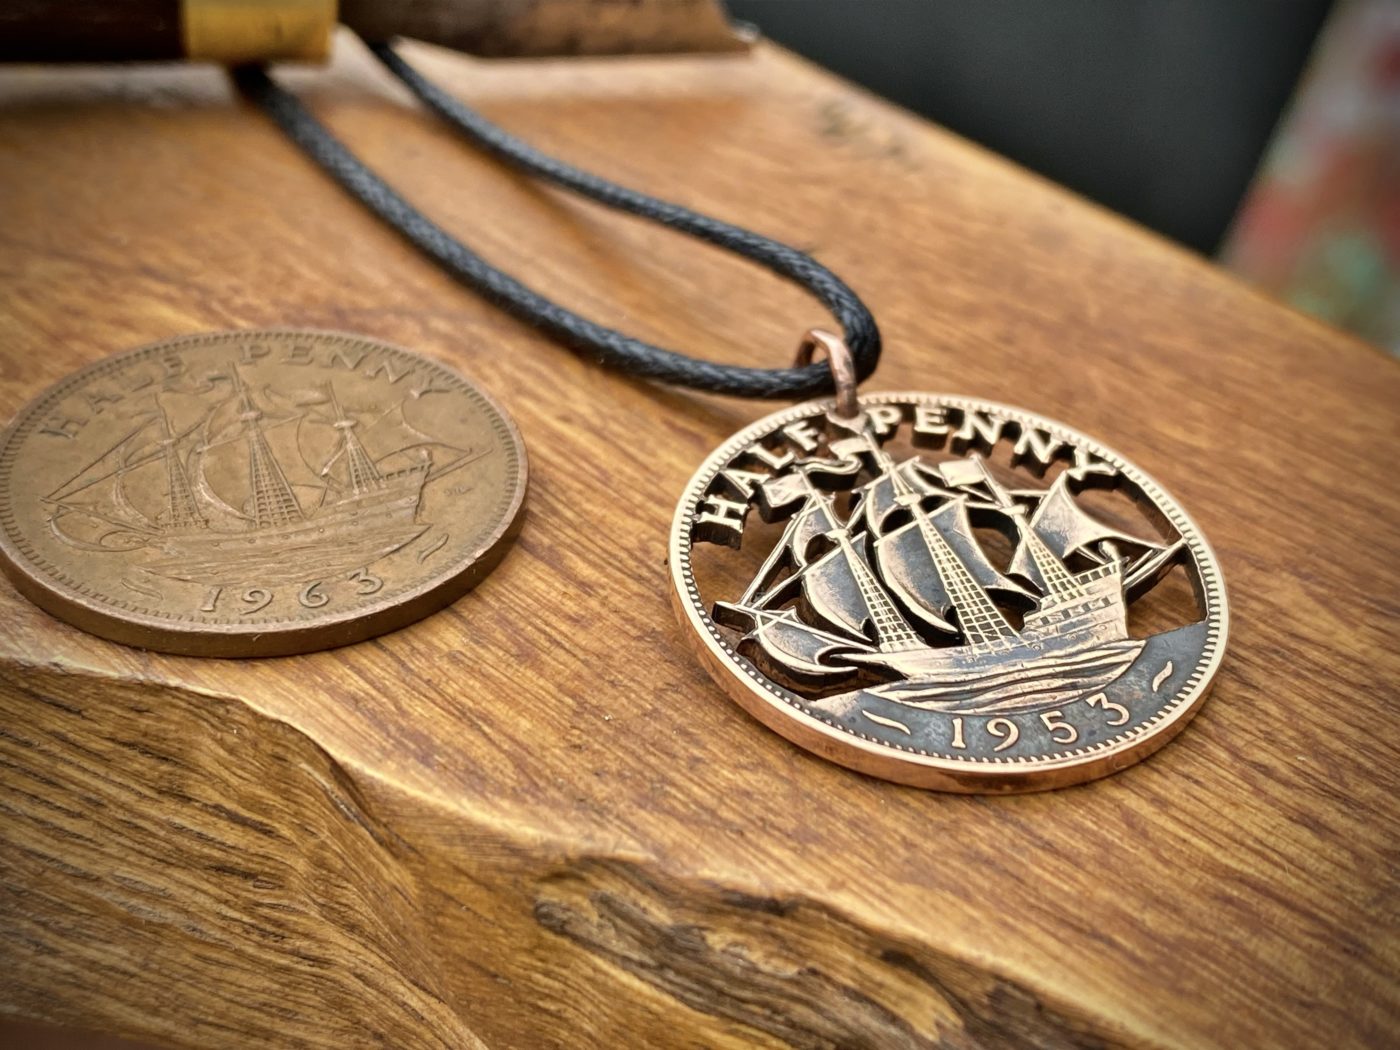 70th birthday ship halfpenny Handcrafted and repurposed Golden Hind ship coin pendant necklace